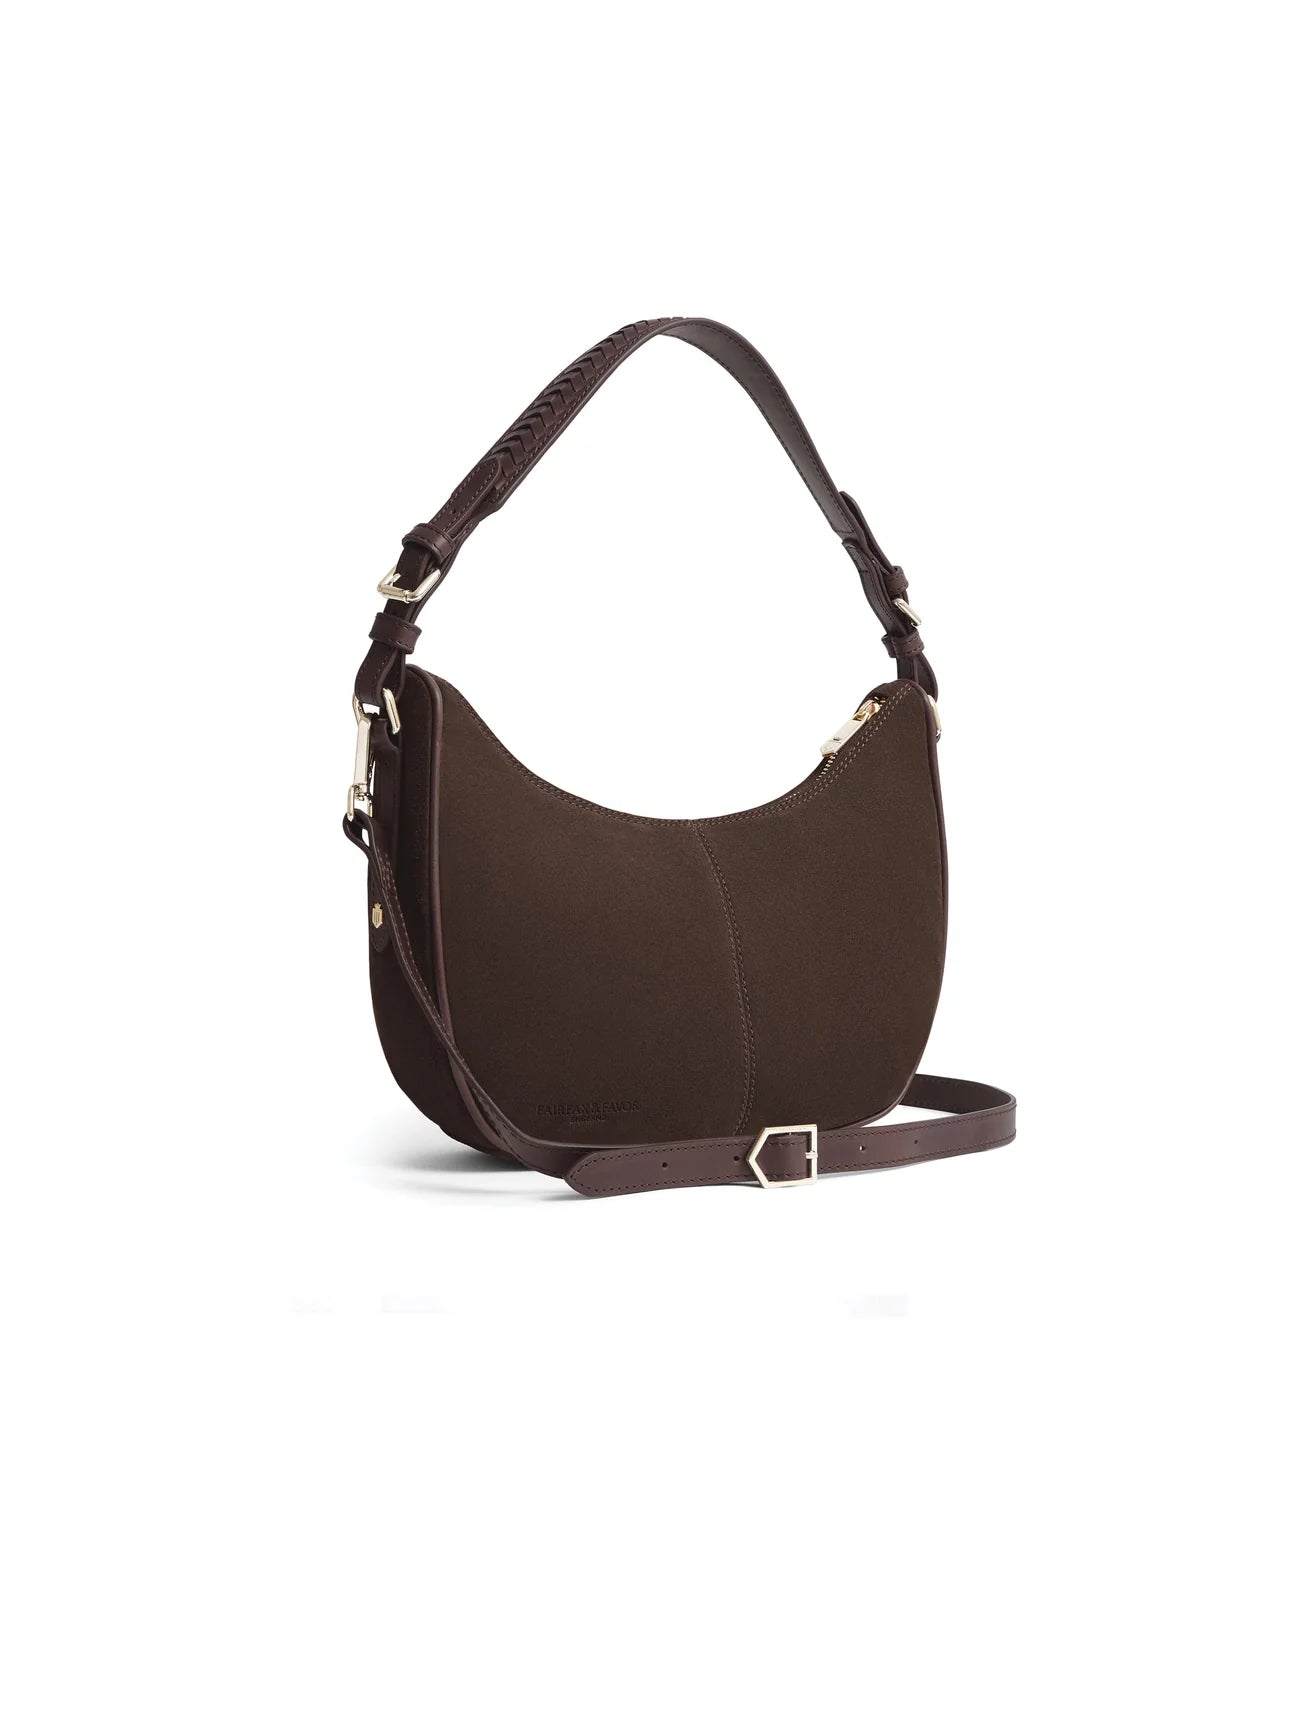 The Tetbury Women's Crescent Bag - Chocolate Suede